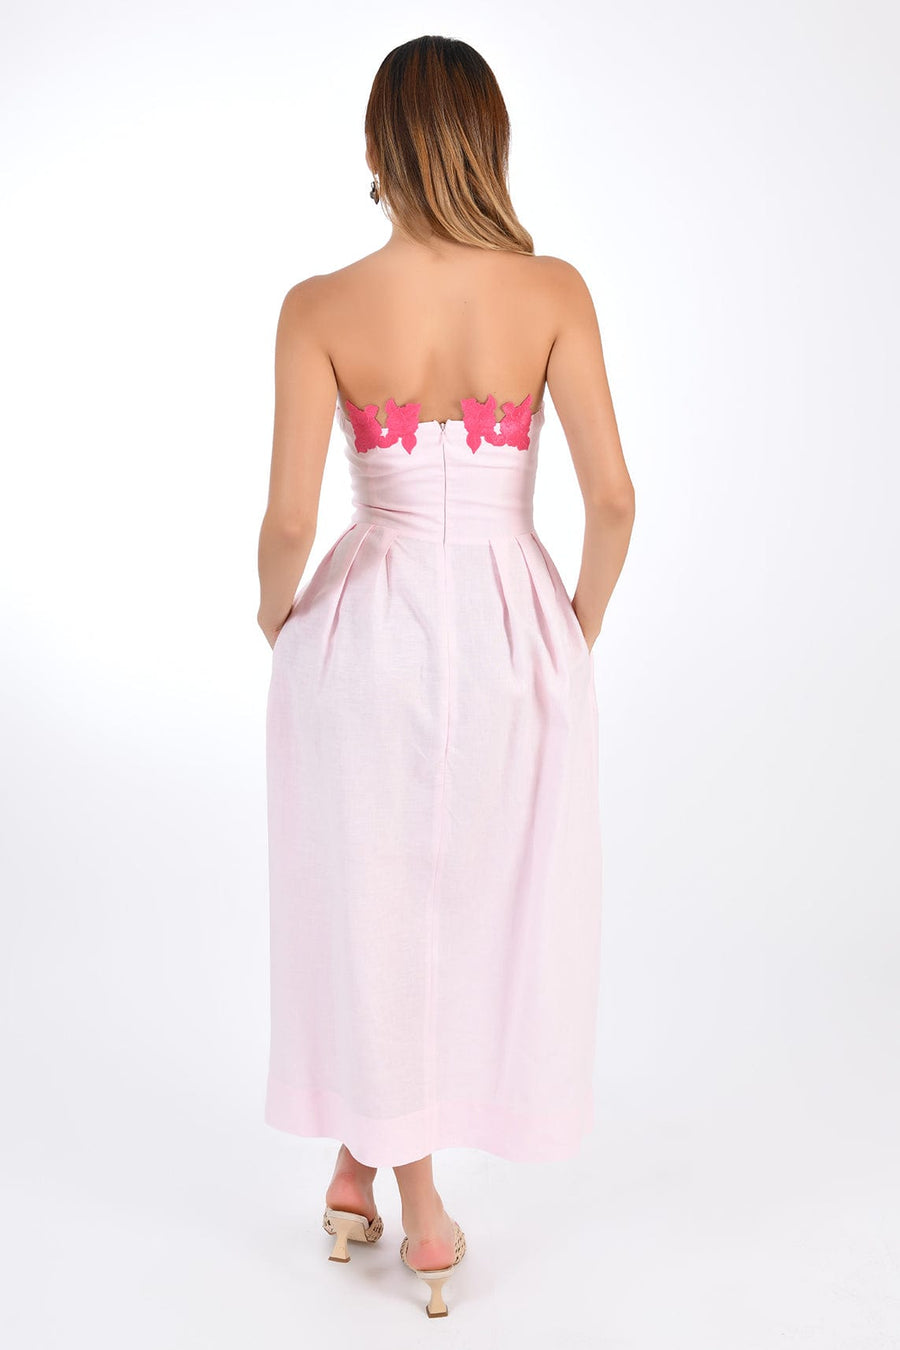 Fanm Mon Lorr Midi Dress in Light pink Linen, showcasing hand-embroidered floral appliques. Back View.